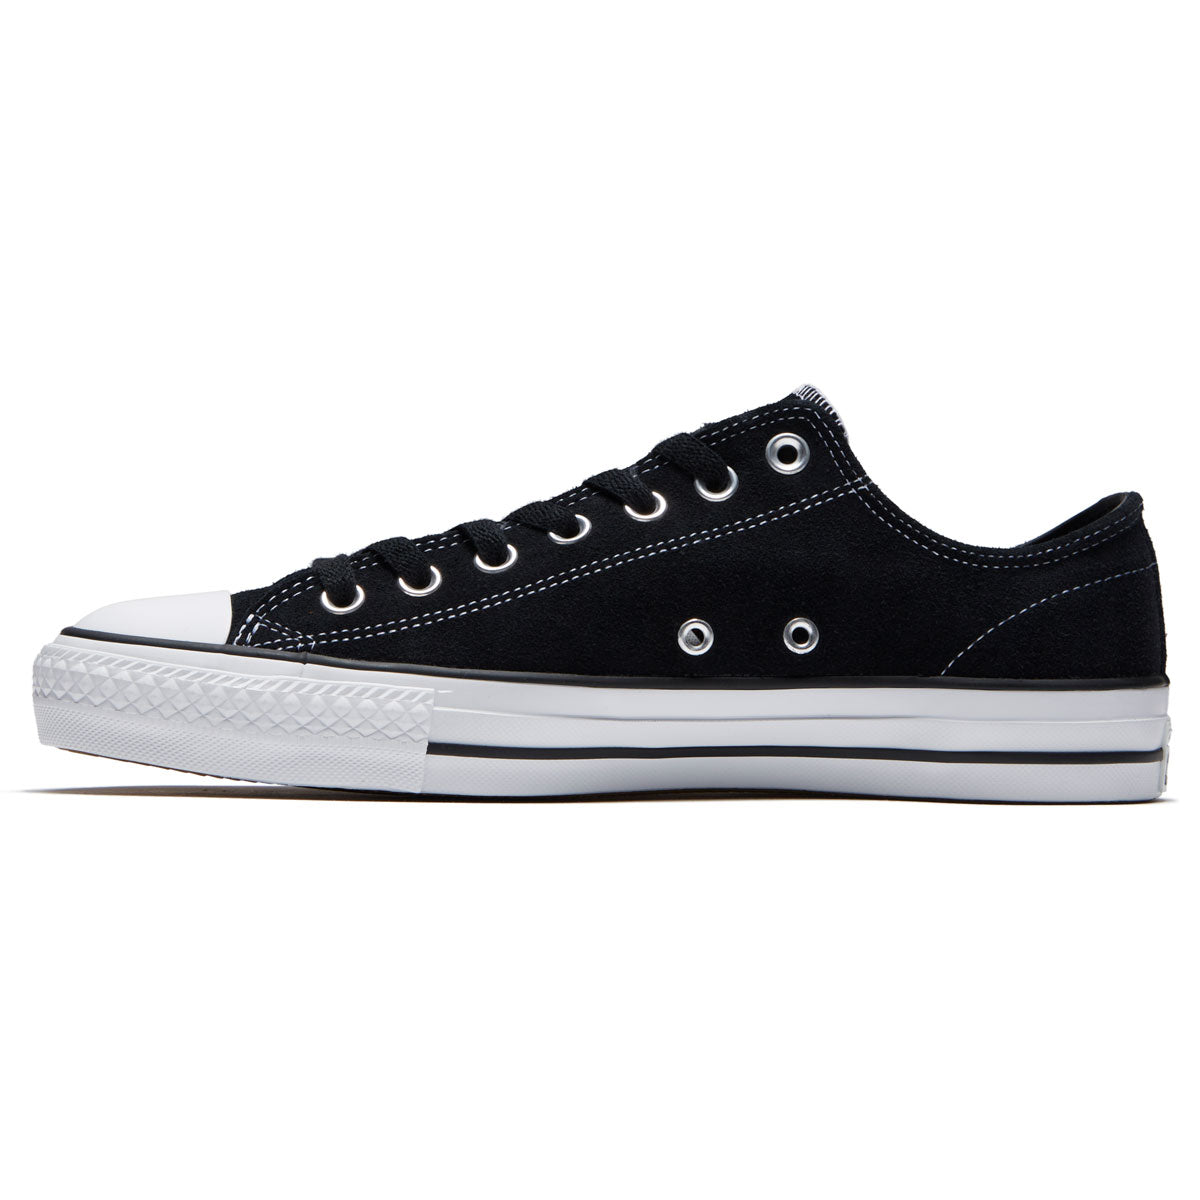 Converse Chuck Taylor All Star Pro Suede Ox Shoes - Black/Black/White image 2